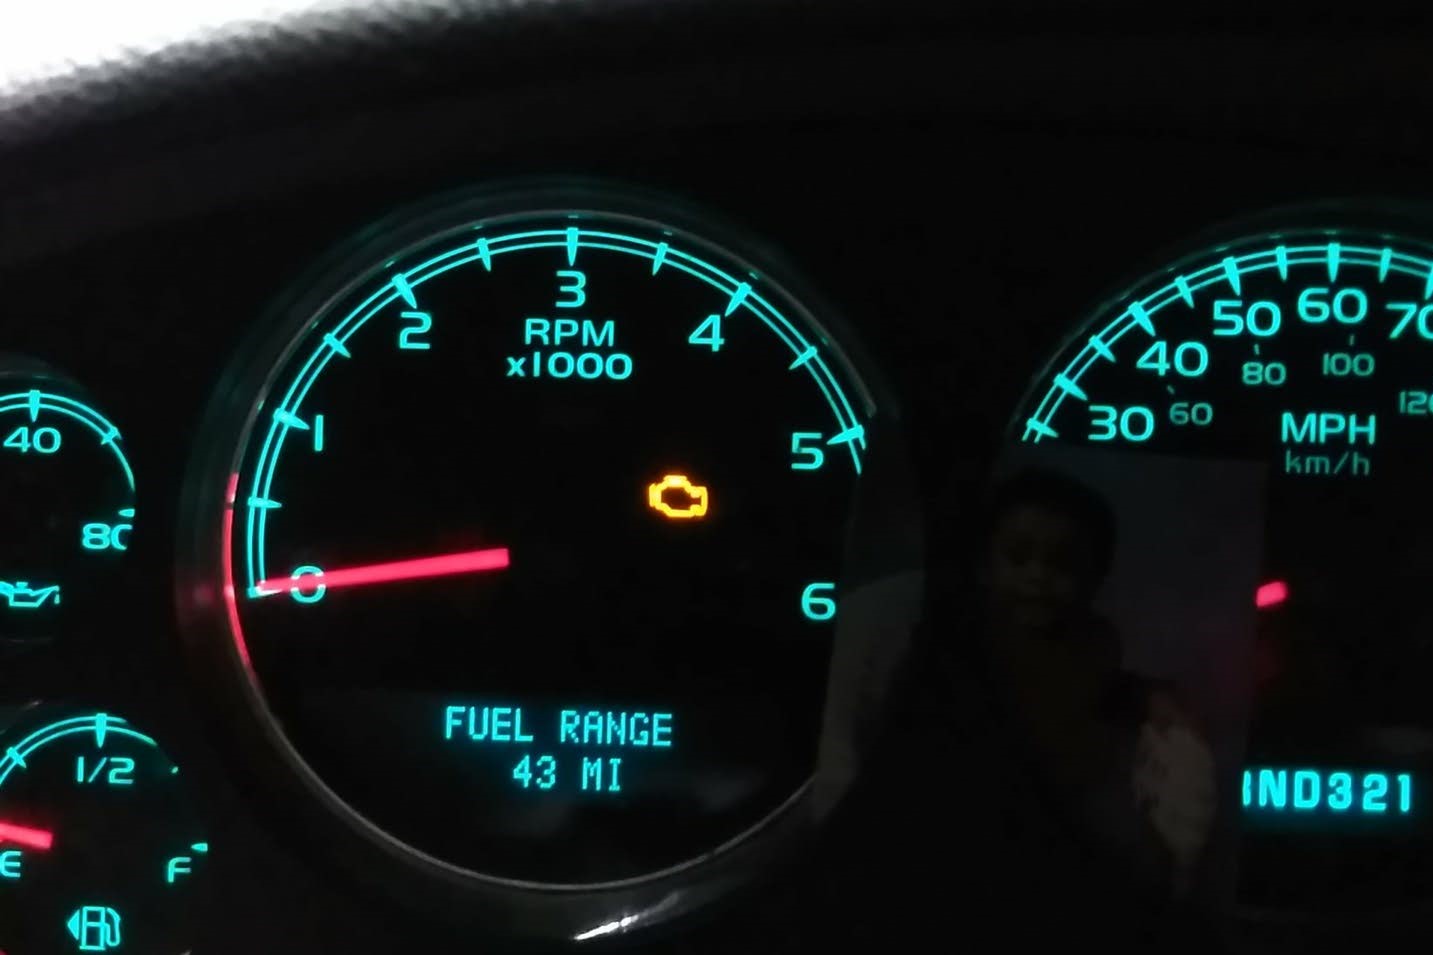 Shocking Car Malfunction At 43 MPH: Check Engine Light Flashes, Power Loss, And Sudden Shutdown!